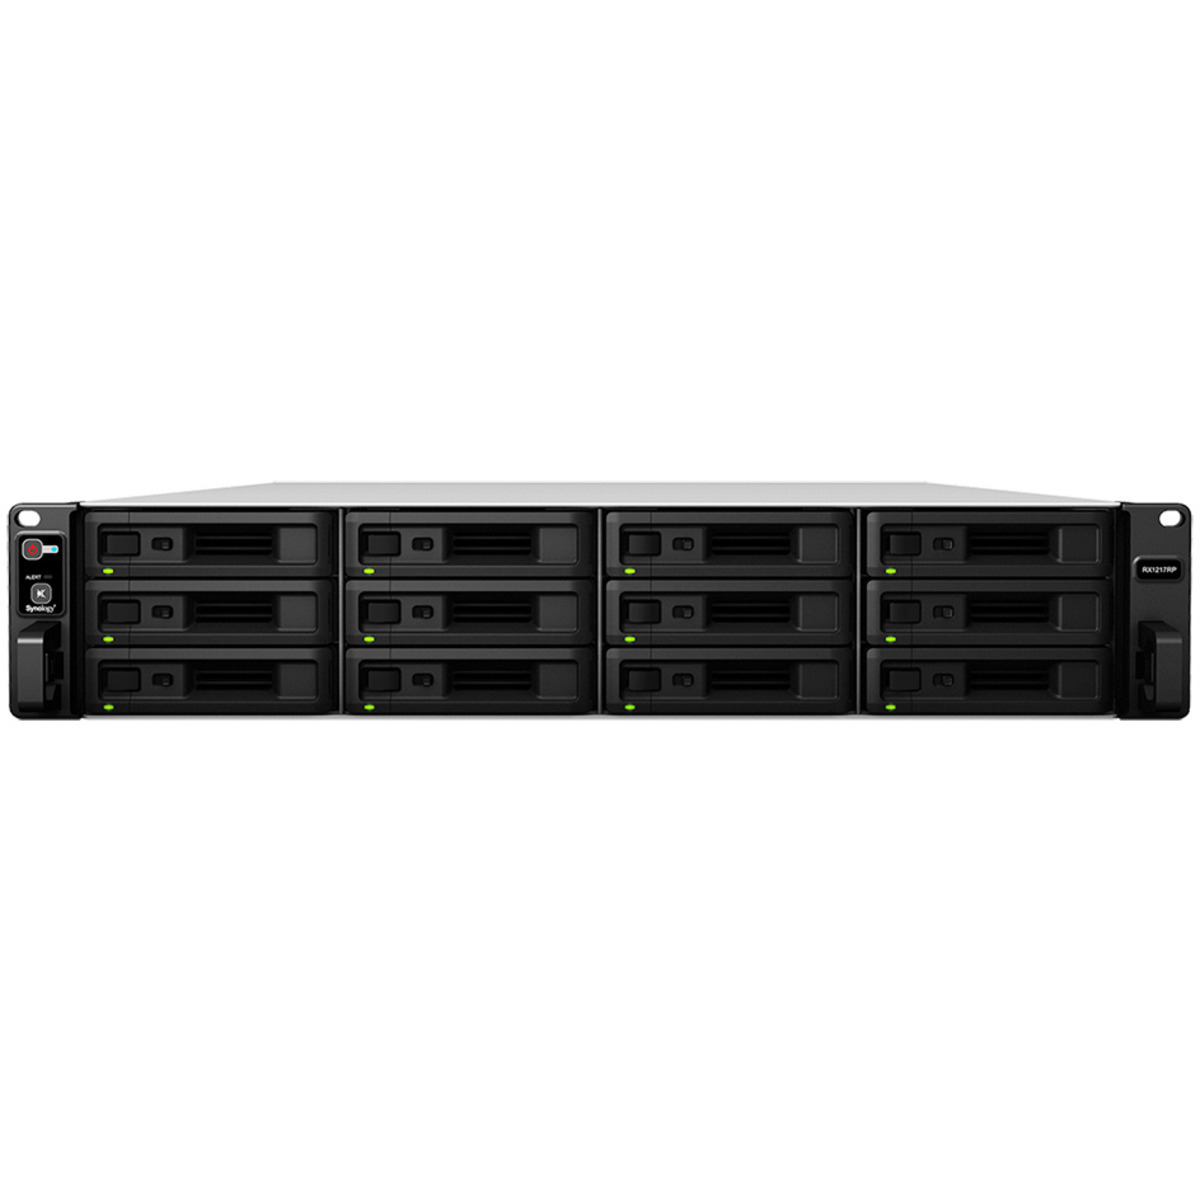 Synology RX1217RP External Expansion Drive 160tb 12-Bay RackMount Large Business / Enterprise Expansion Enclosure 8x20tb Seagate IronWolf Pro ST20000NT001 3.5 7200rpm SATA 6Gb/s HDD NAS Class Drives Installed - Burn-In Tested RX1217RP External Expansion Drive